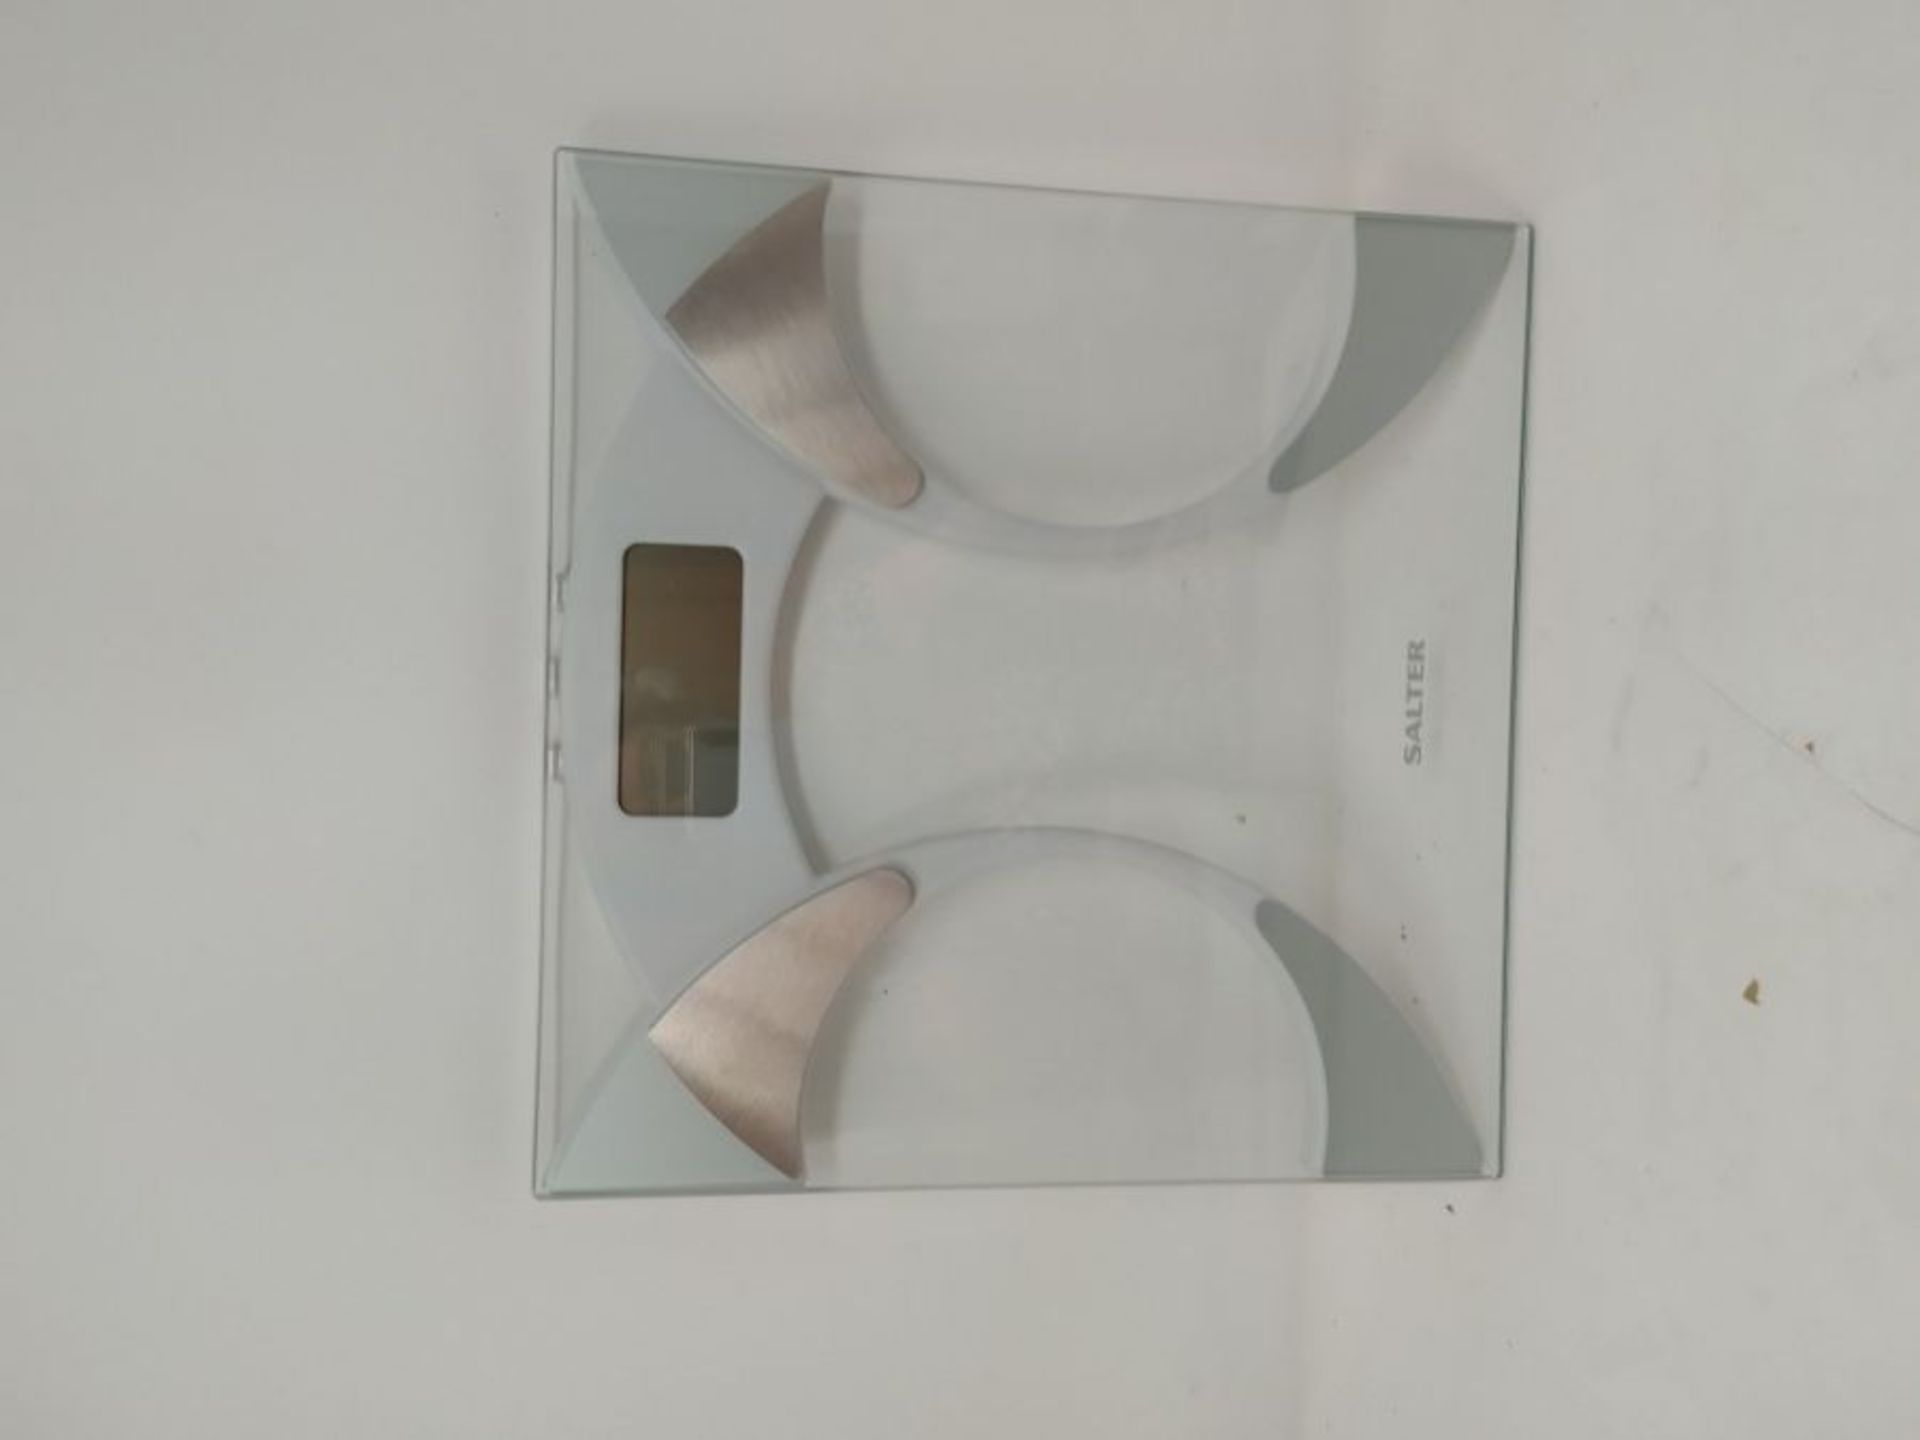 Salter Ultra Slim Analyser Bathroom Scales, Measure Weight BMI BMR Body Fat Percentage - Image 2 of 2